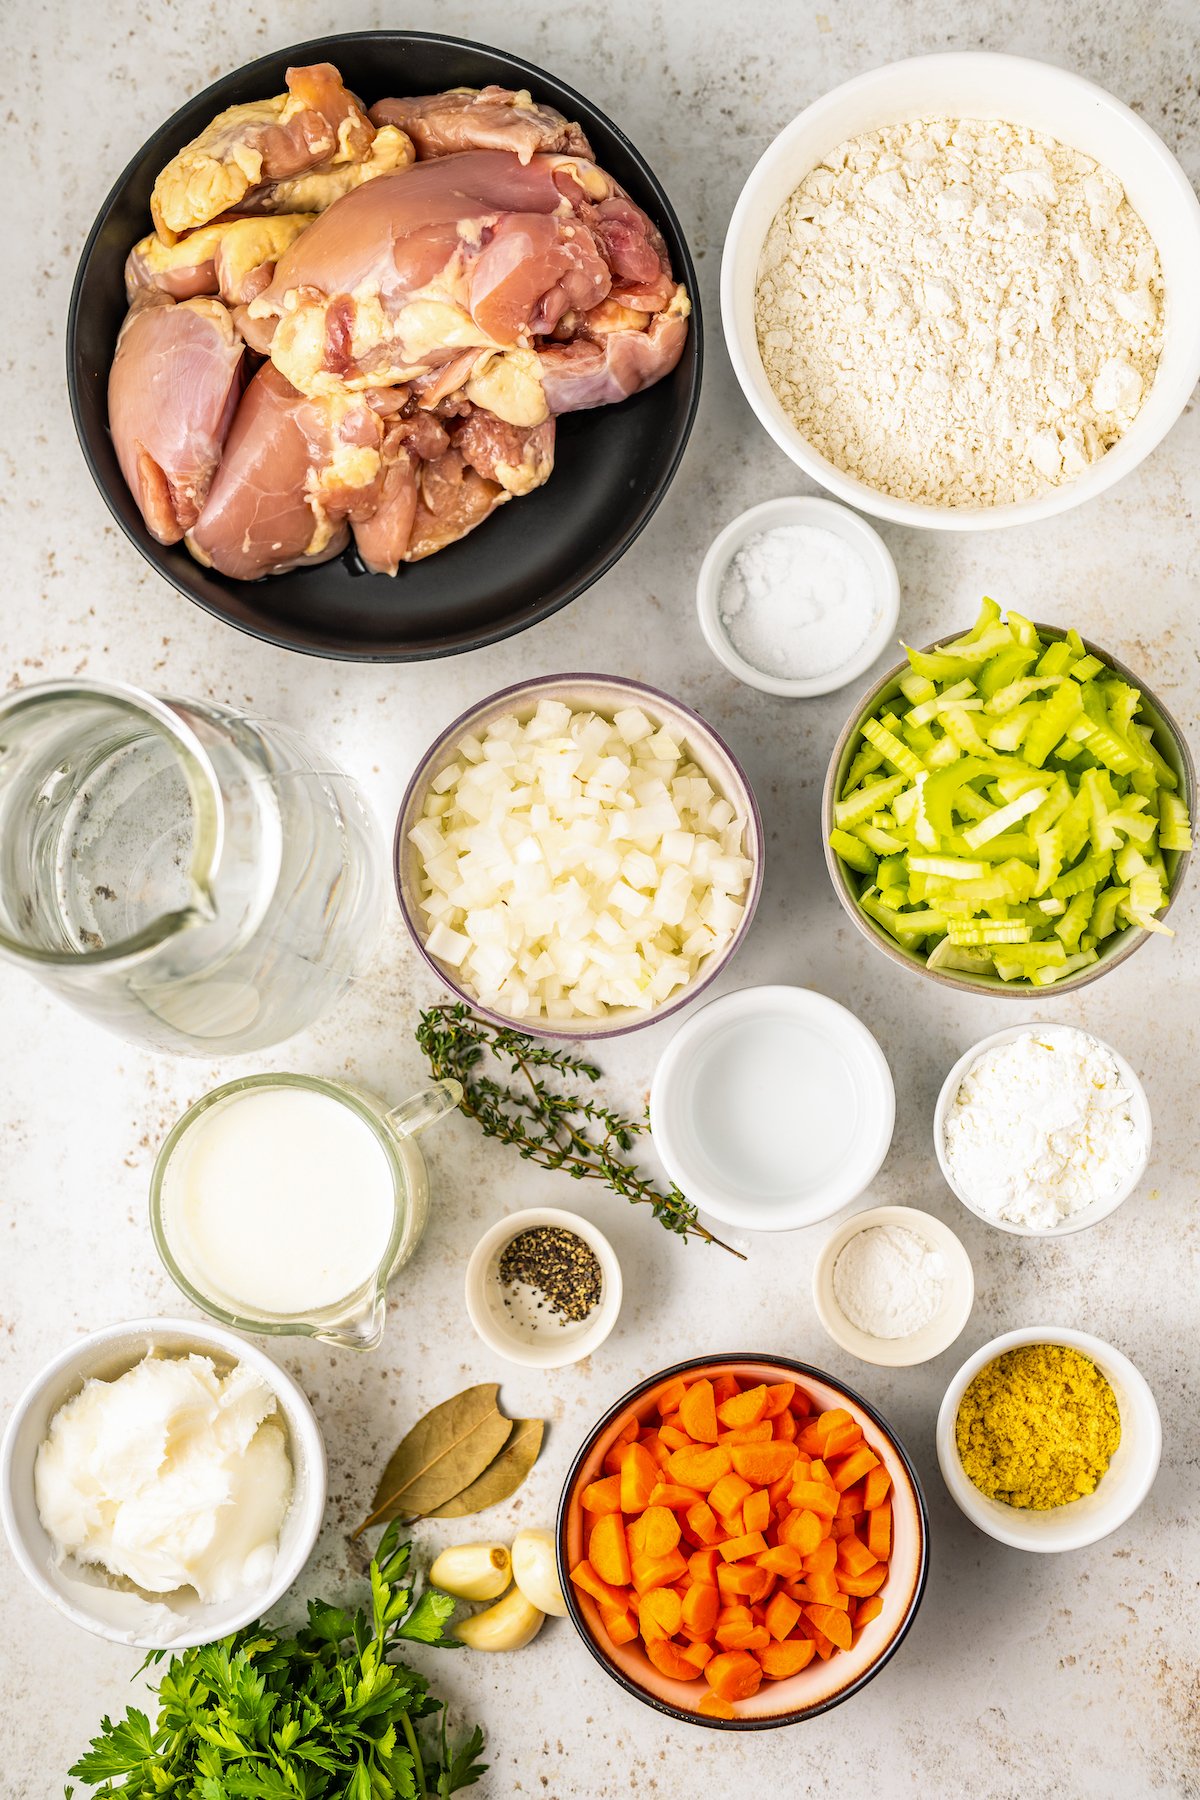 Ingredients for old fashioned chicken and dumplings recipe, arranged in bowls on a work surface.